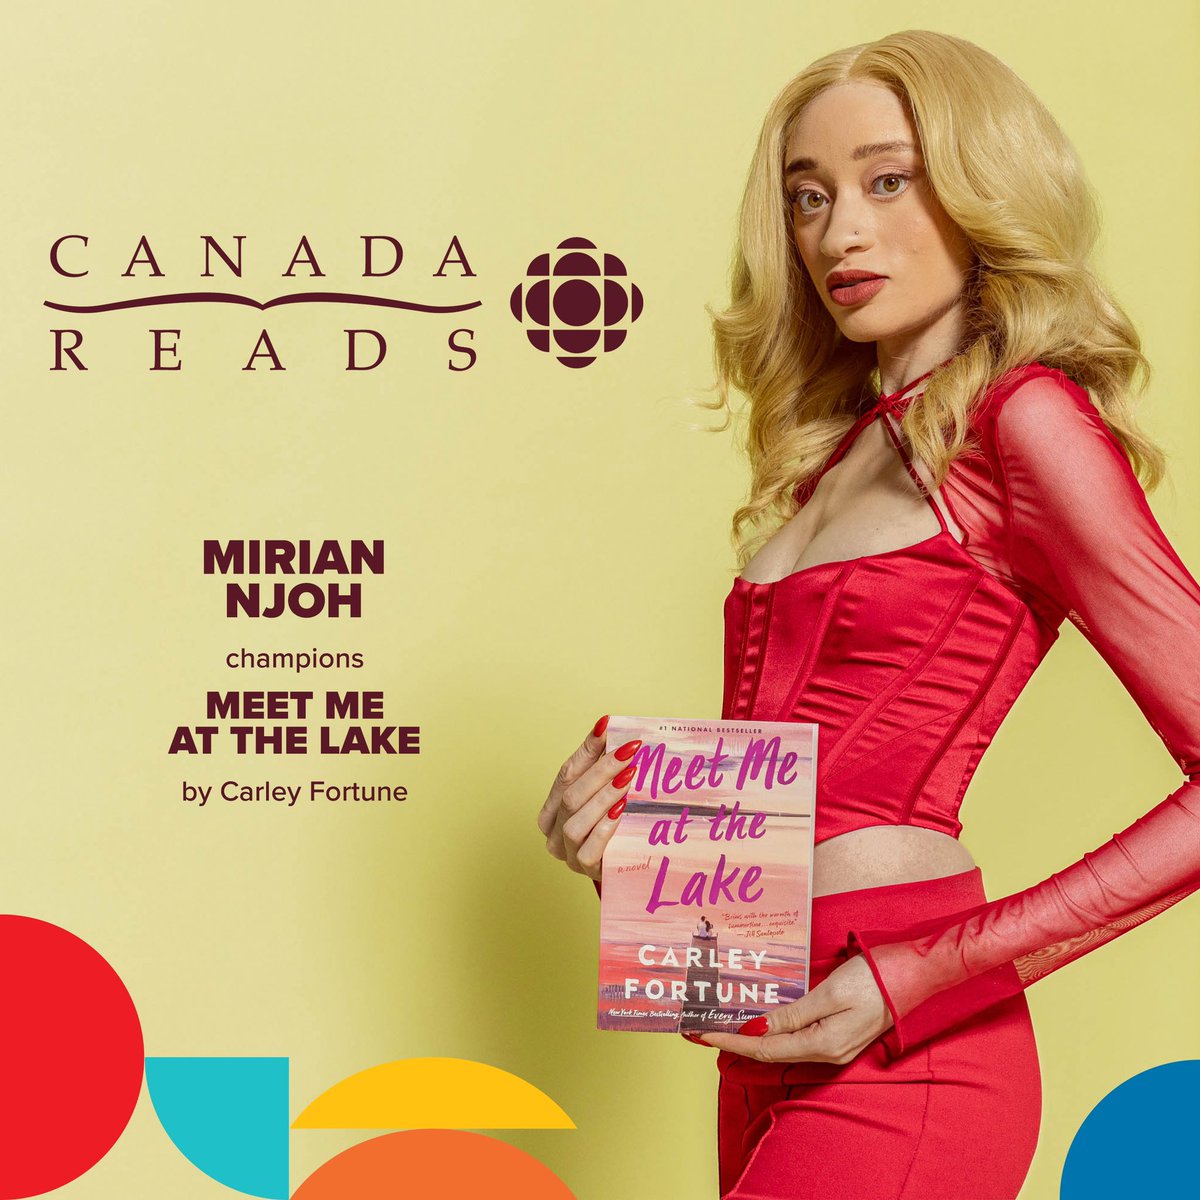 Happy #CanadaReads Day! Join us in cheering on @MirianNjoh today as she defends @CarleyFortune's breathtaking #1 bestseller, Meet Me at the Lake - the first ever romance novel selected! Tune in to the great Canadian book debate this morning at 10am ET. @cbcbooks